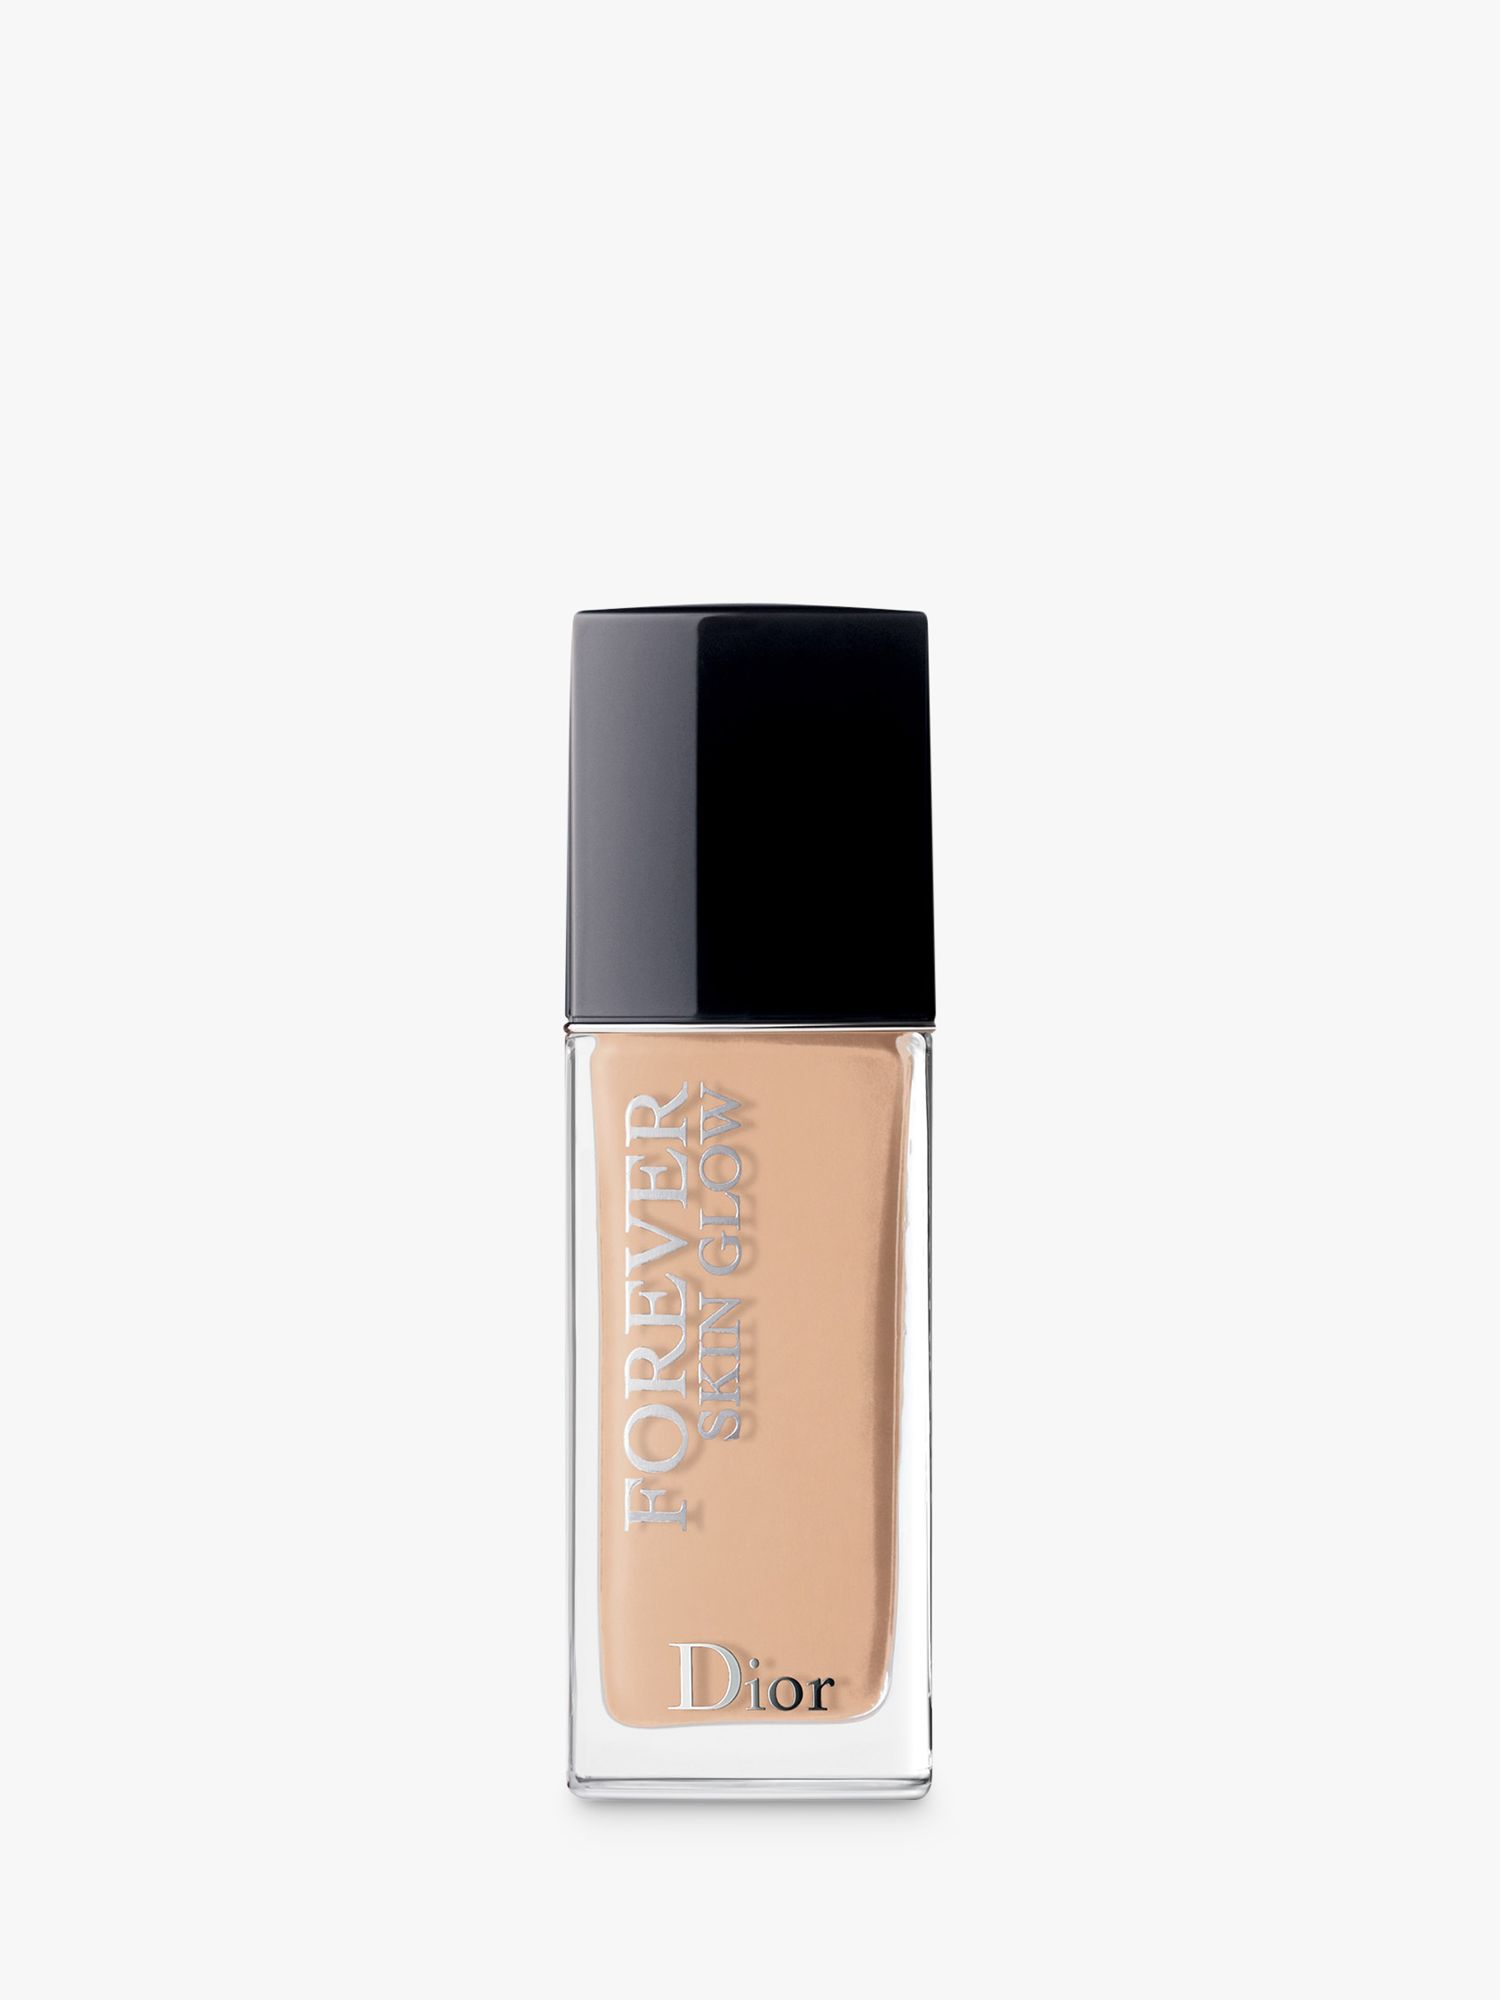 Dior Forever Skin Glow Foundation at 